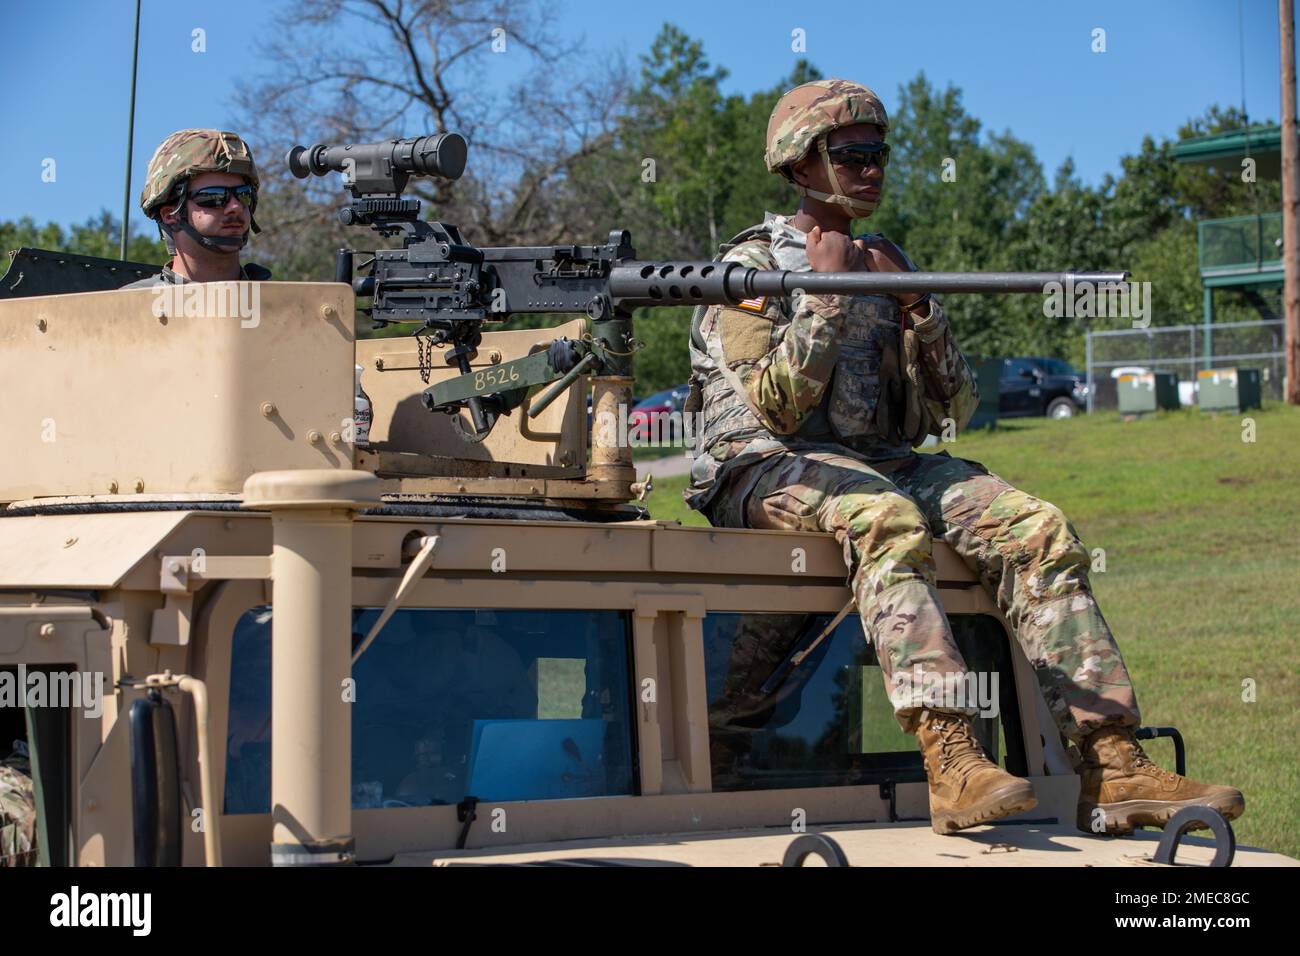 U.S. Army Reserve Spc. Timothy Salazar (left) and Spc. Enzra Kingston, both master gunners with the 84th Training Command, attending Combat Support Training Exercise (CSTX) 86-22-02, completes a M240B machine gun crew-served qualification course as part of Task Force Railgun provided by the 84th Training Command on Fort McCoy, Wisconsin, Aug. 16, 2022. CSTX is an exercise developed to train Army Reserve units and Soldiers to deploy on short-notice and bring capable, combat-ready, and lethal capabilities in support of the Army and our joint partners anywhere in the world Stock Photo